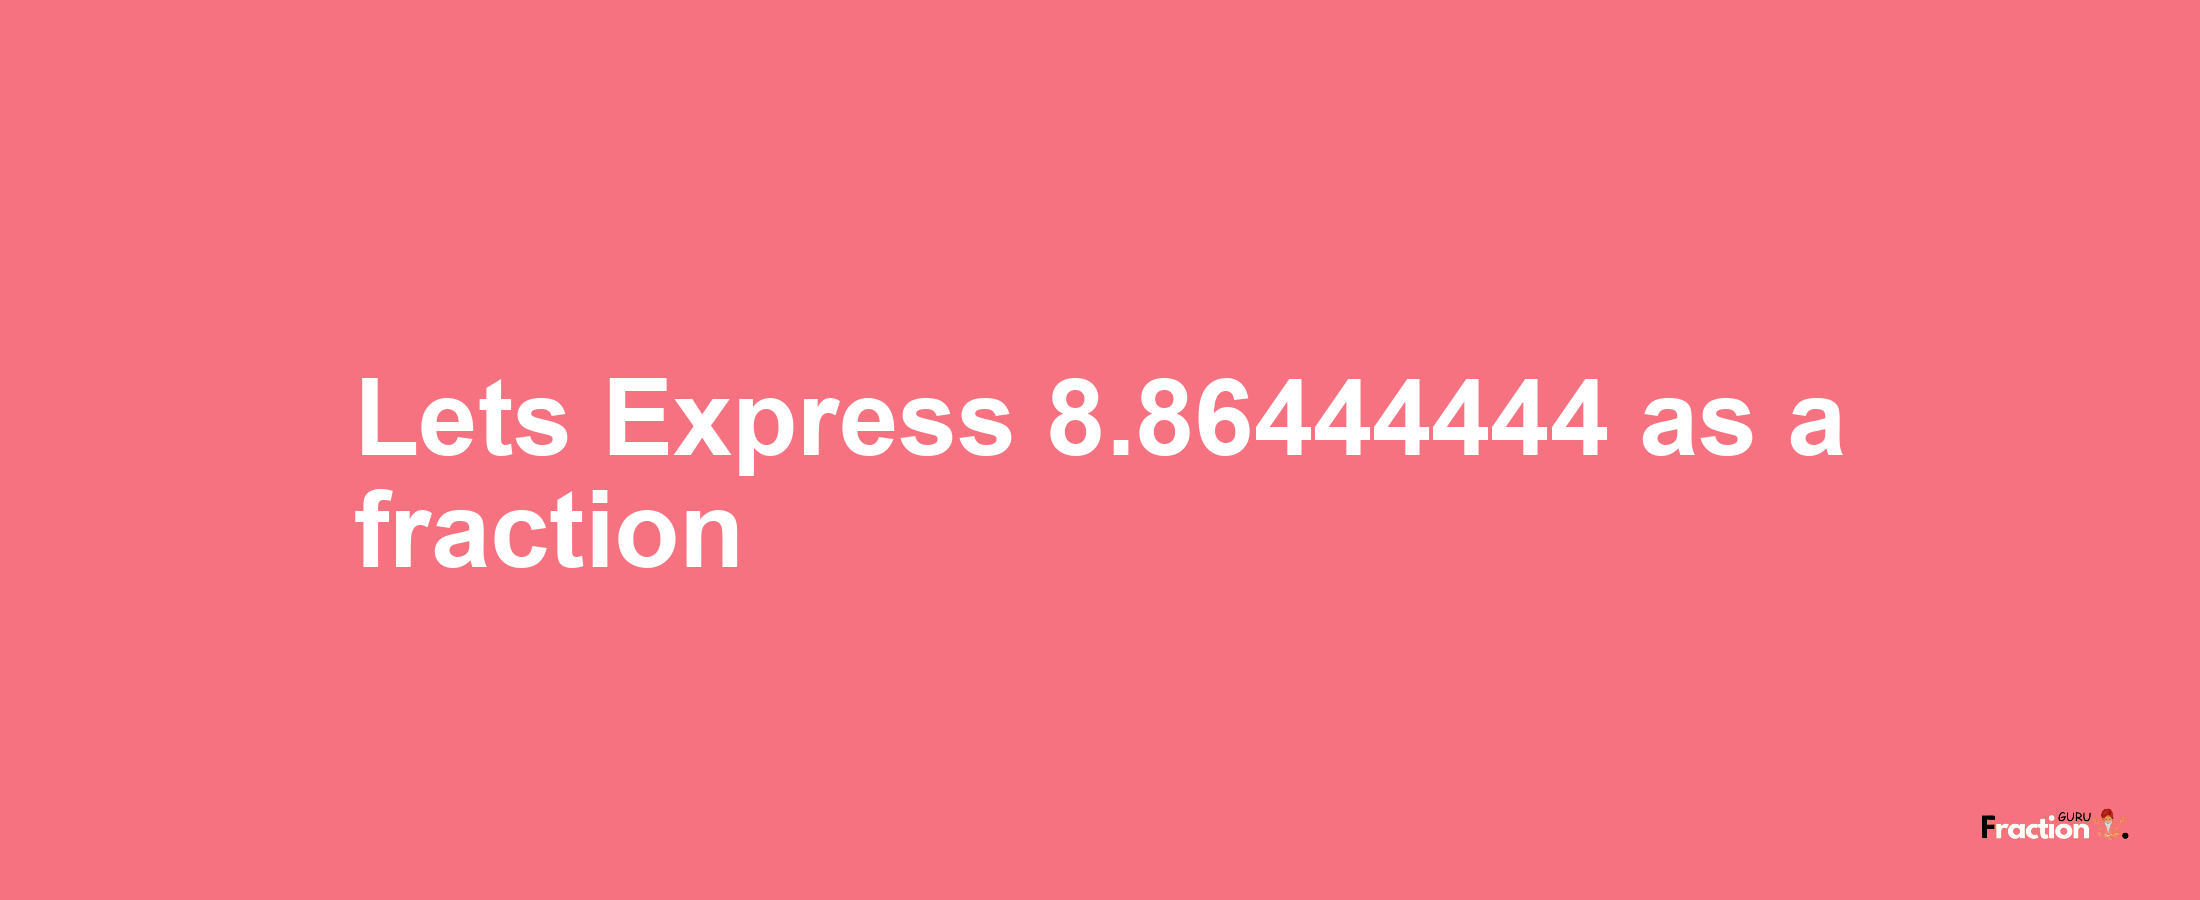 Lets Express 8.86444444 as afraction